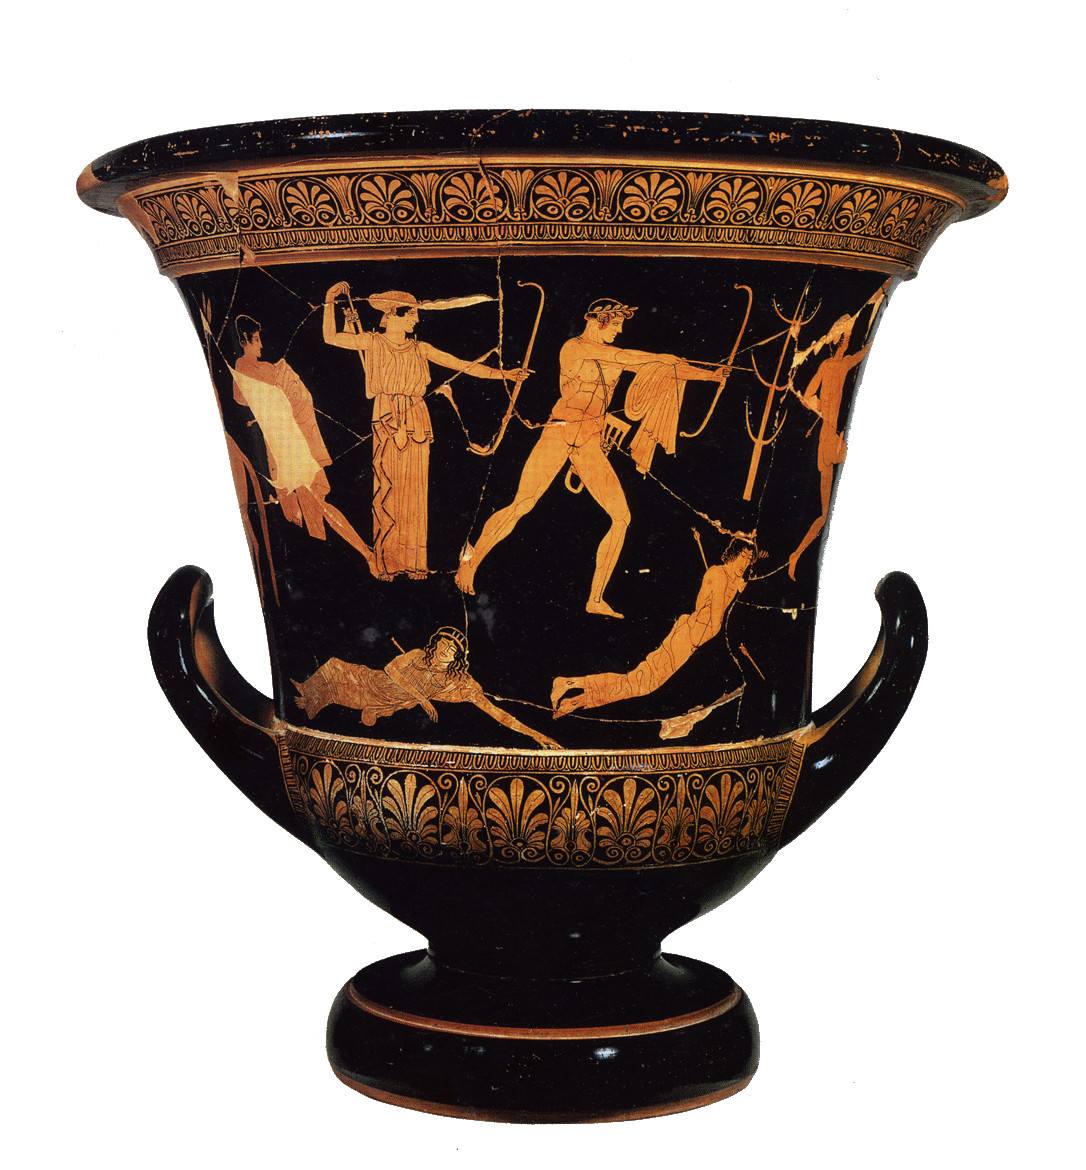 17 Wonderful Vase Painting 2024 free download vase painting of the history of ancient greece podcast 057 classical paintings pertaining to photo vase painting of apollo and artemis killing niobes children by niobid painter